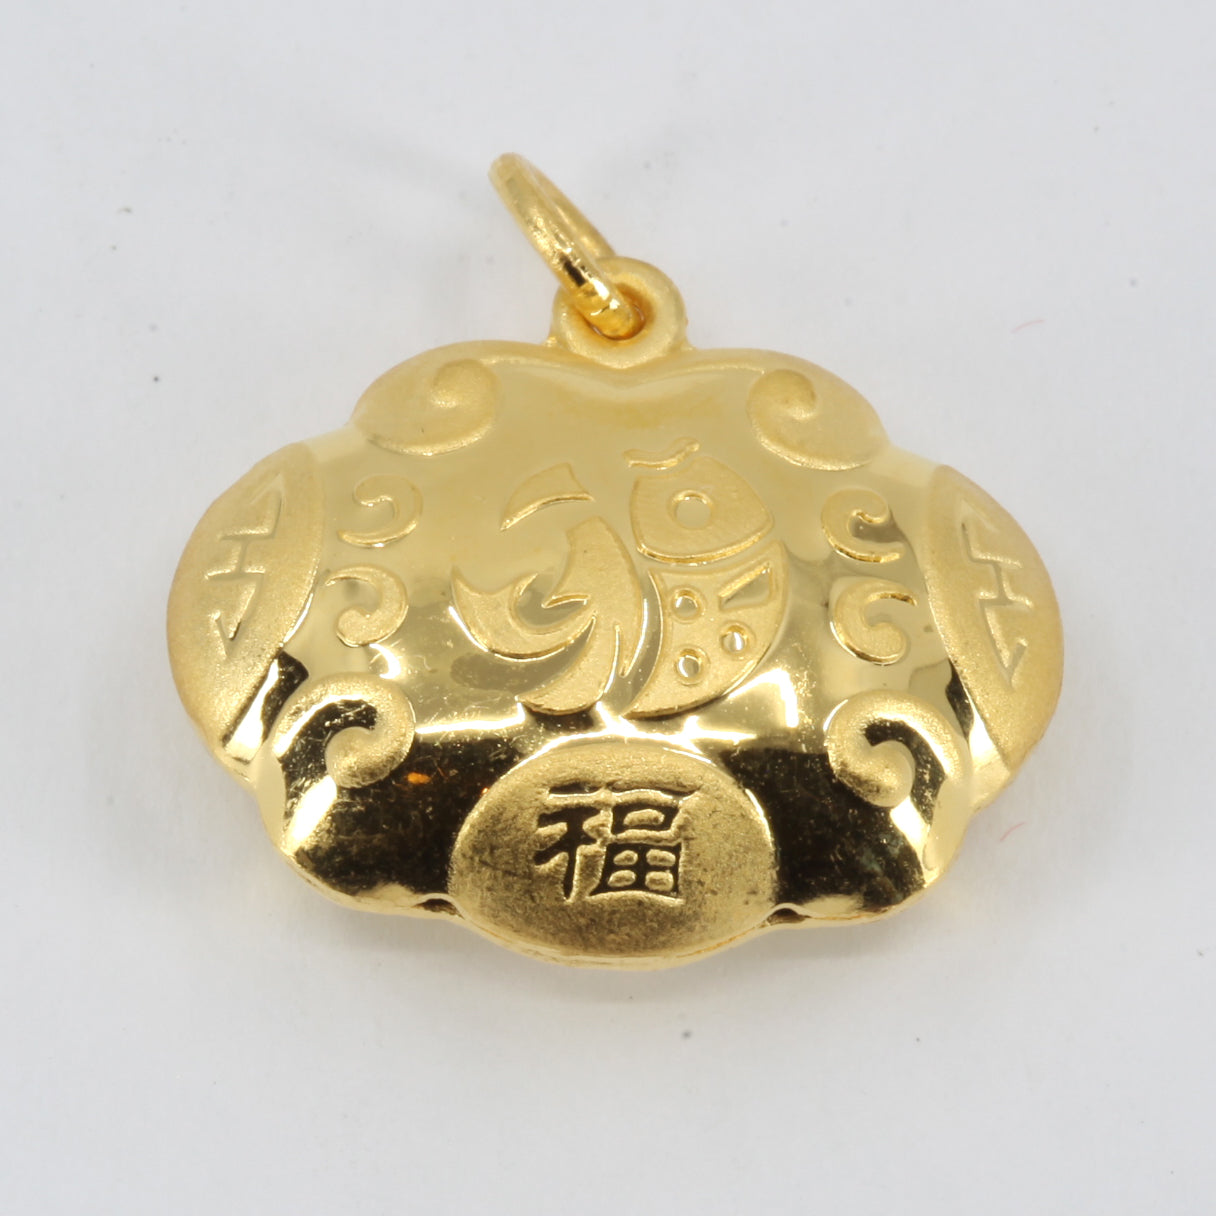 24K Solid Yellow Gold Baby Puffy Blessed Longevity Lock Hollow Pendant 4.6 Grams